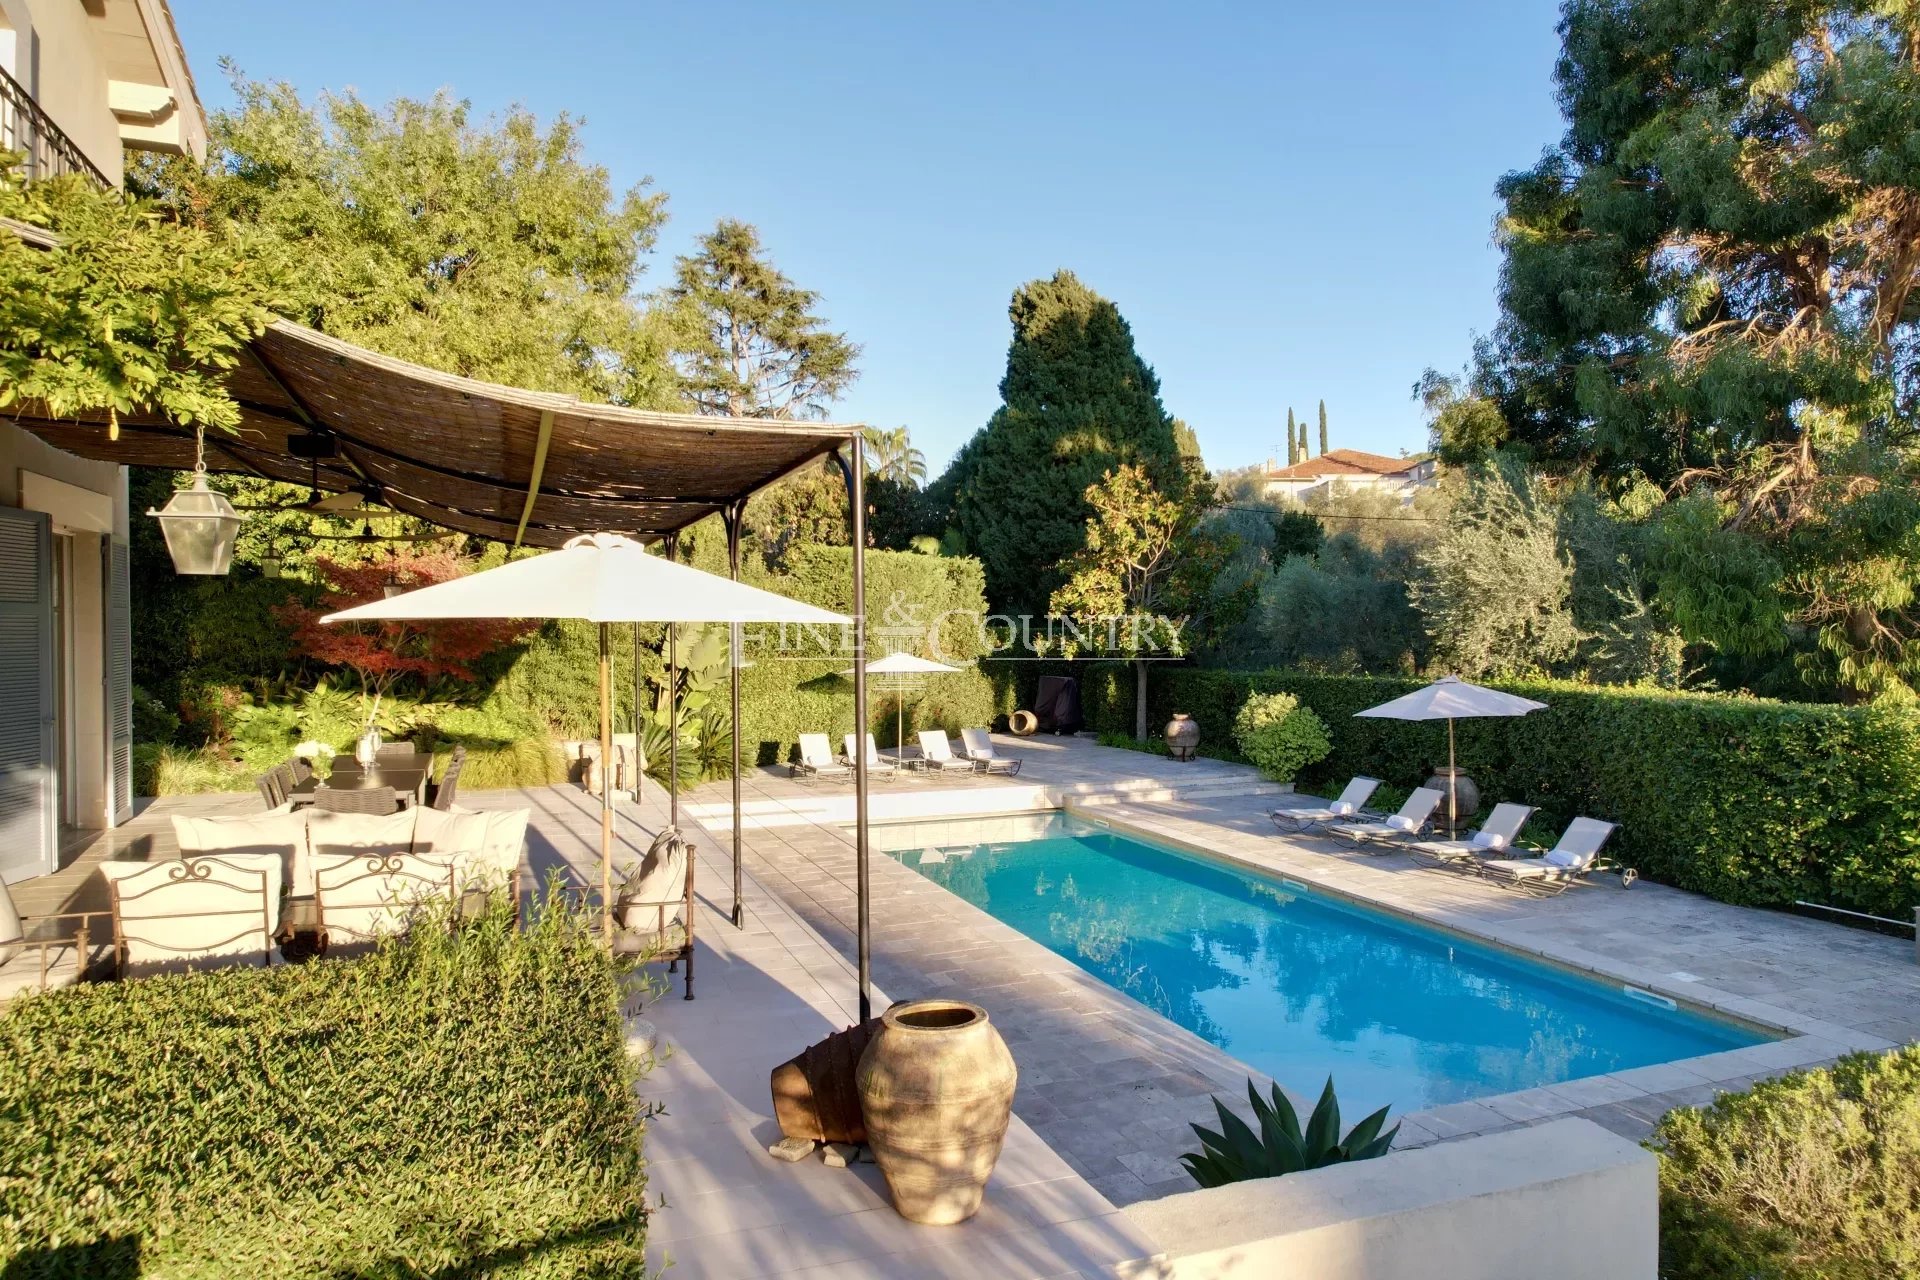 Property for sale on the Cap d'Antibes